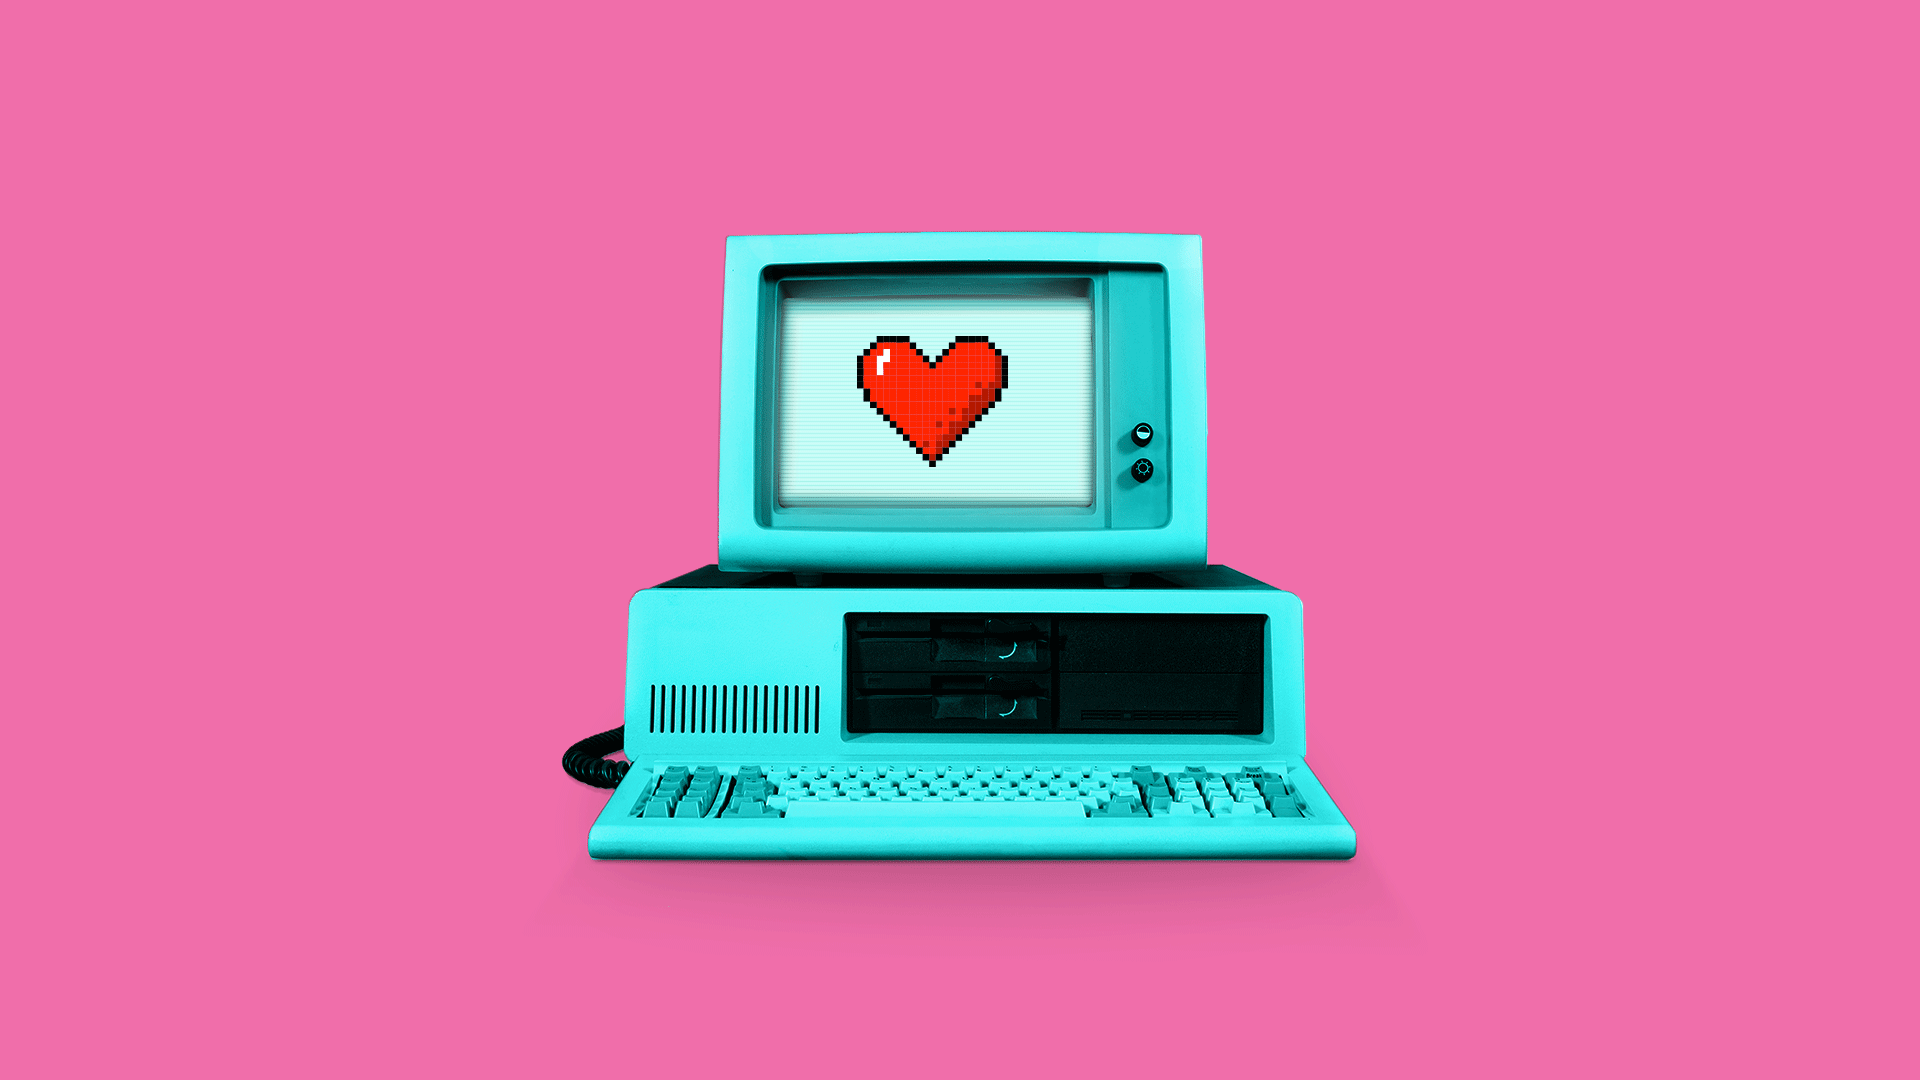 Animated illustration of a retro DOS computer with a pixelated heart breaking apart on the screen.